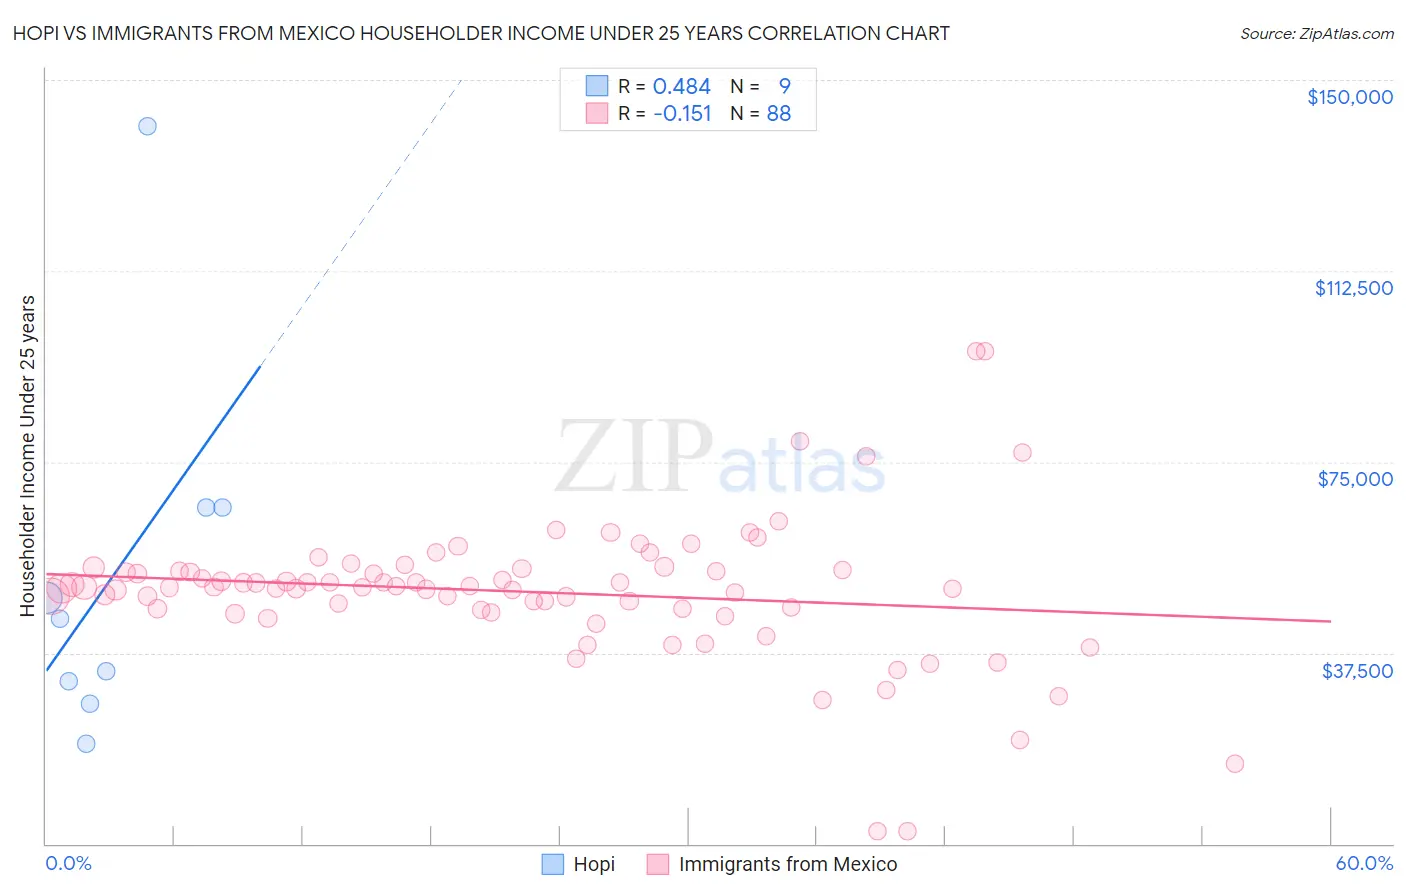 Hopi vs Immigrants from Mexico Householder Income Under 25 years